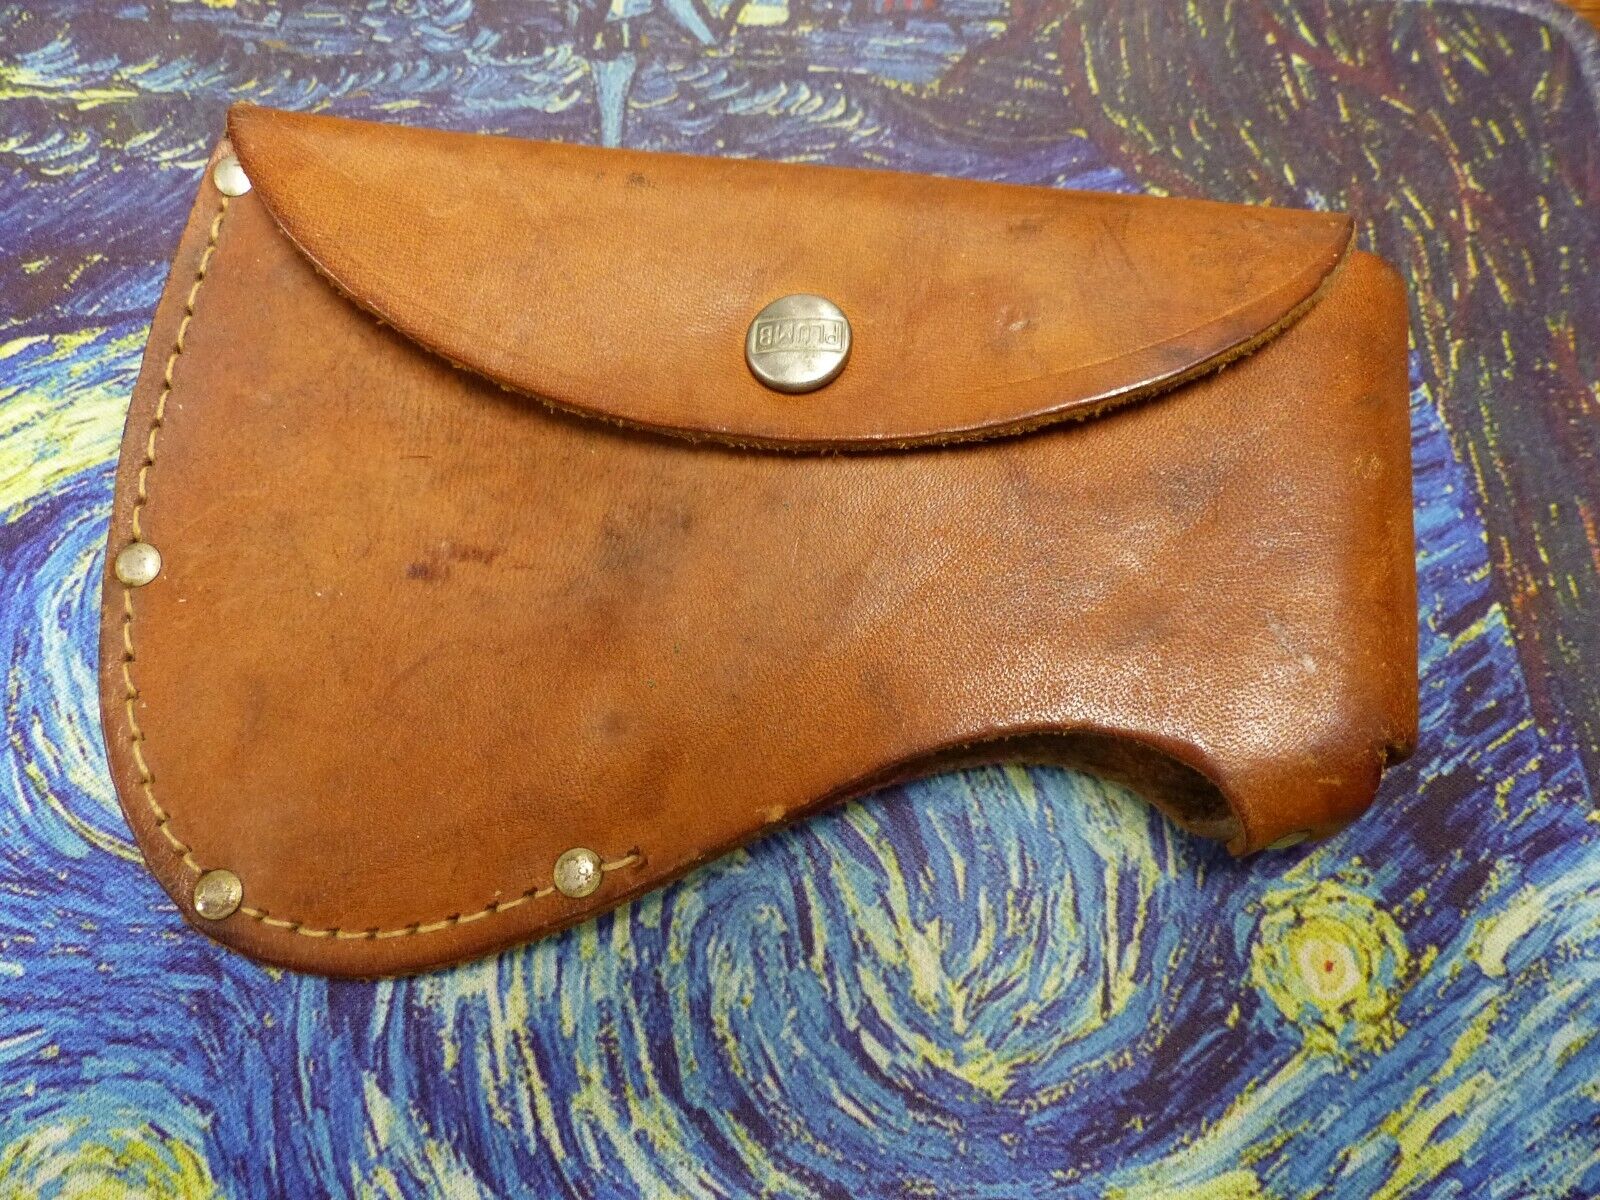 Vintage Plumb Hatchet Small Axe Genuine Leather Sheath Cover